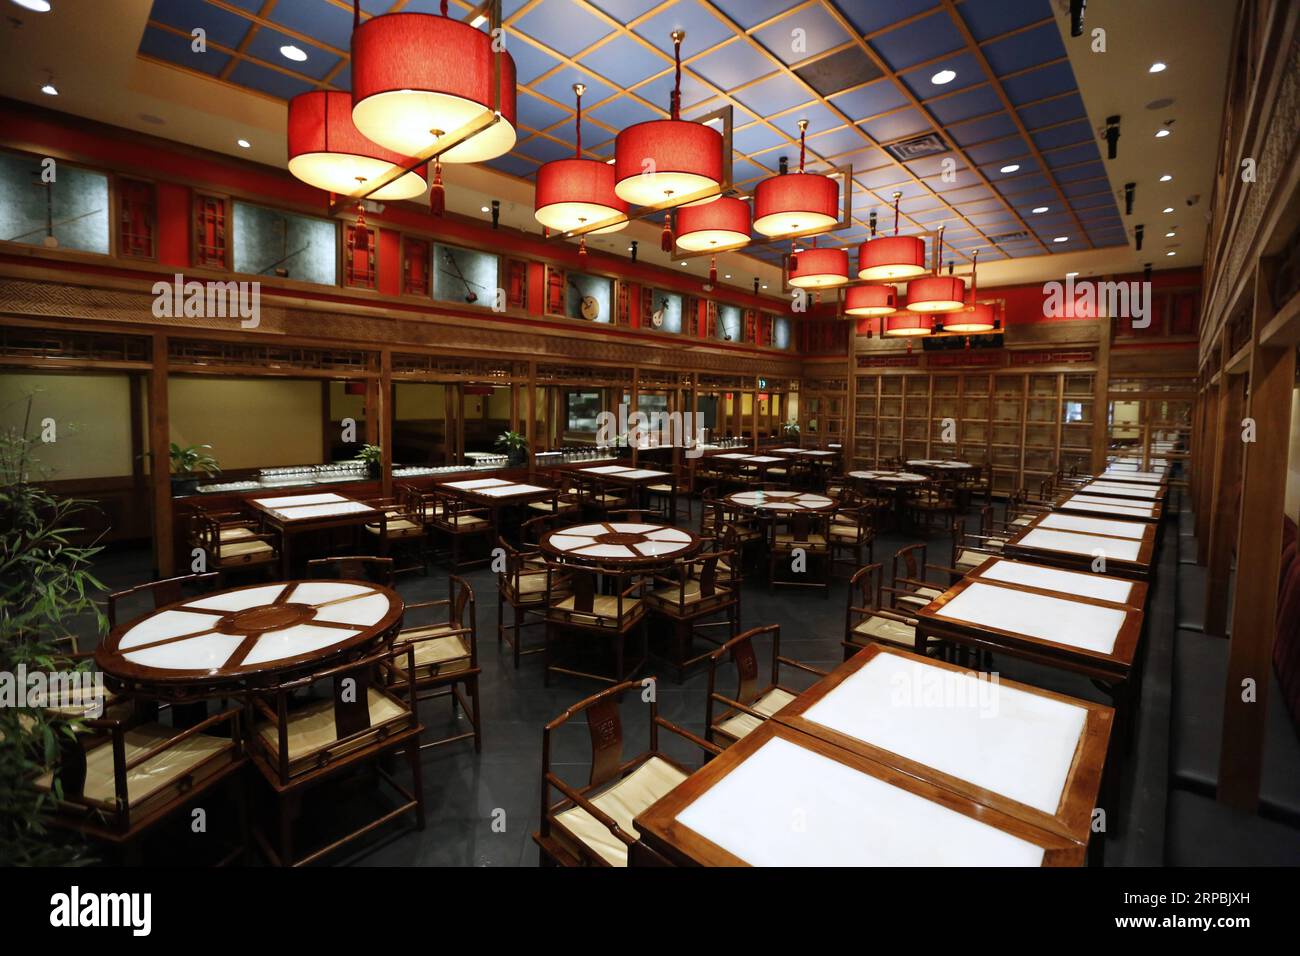 (190610) -- LOS ANGELES, June 10, 2019 (Xinhua) -- Photo taken on June 7, 2019 shows the interior view of Bistro Na s in Temple City, Los Angeles, the United States. Bistro Na s in Los Angeles made headlines this week with the announcement that it had been awarded a coveted Michelin Star by the famed Michelin Restaurant Guide. This special ranking broke Michelin s 10-year absence from Los Angeles, and made Bistro Na s the only Chinese restaurant in Southern California to be so honored. (Xinhua/Li Ying) U.S.-LOS ANGELES-CHINESE CUISINE-BISTRO NA S PUBLICATIONxNOTxINxCHN Stock Photo